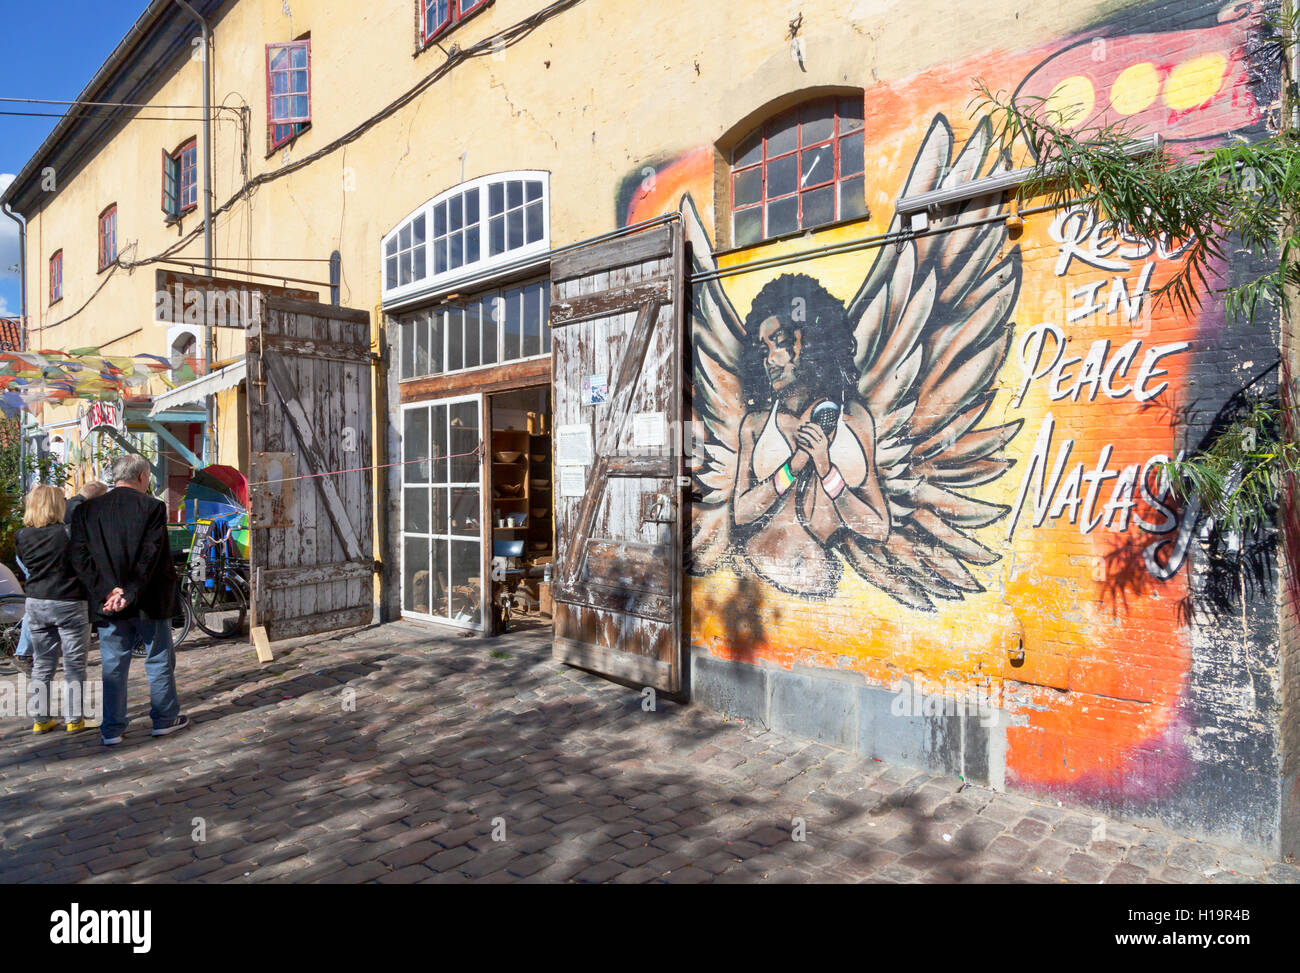 Building in Pusher Street in freetown Christiania, containing more venues and a workshop. Mural is a tribute to Natasja. Stock Photo